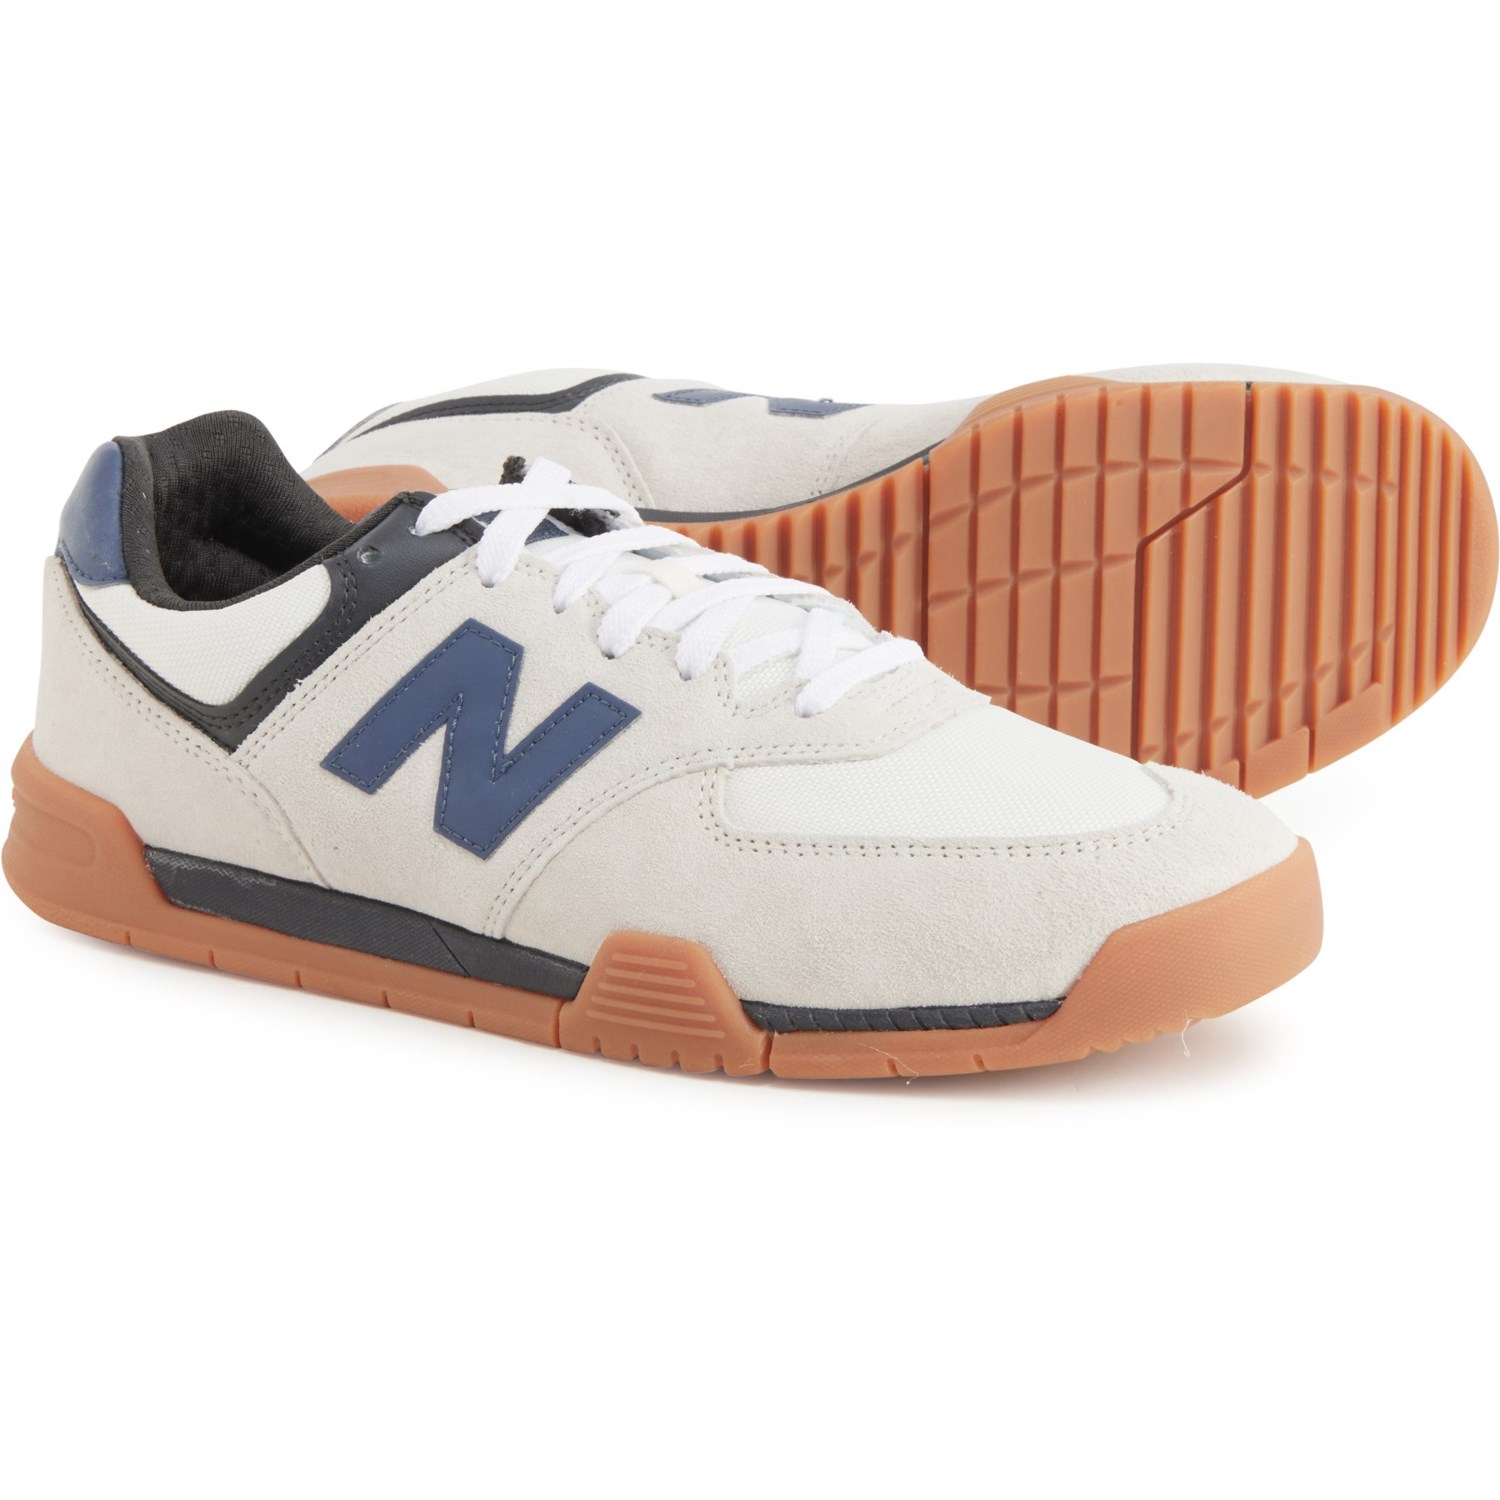 New Balance CT 574 Sneakers - Suede (For Men)